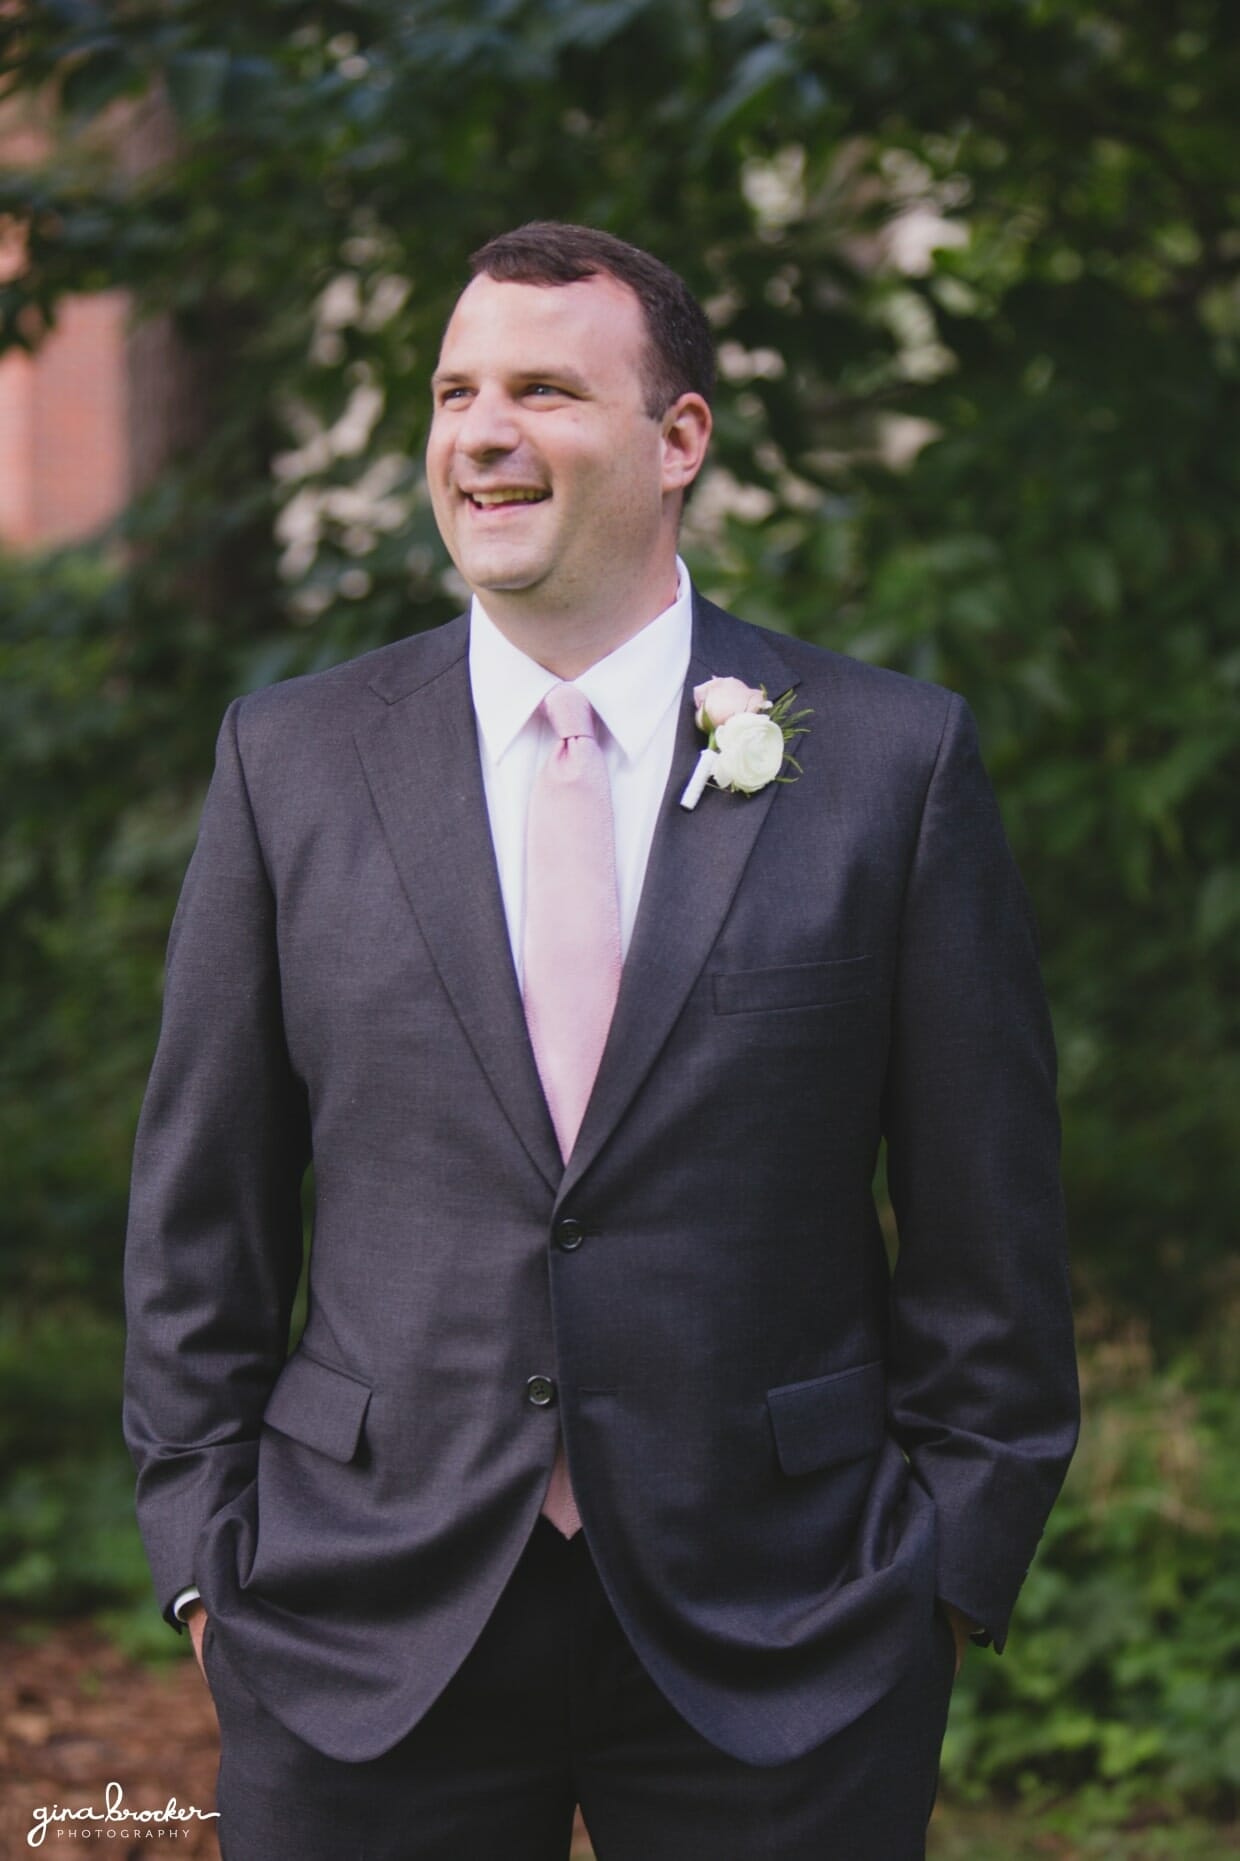 A candid portrait of a groom laughing as he waits for his bride to arrive to the first look during their classic and elegant wedding in Boston, Massachusetts